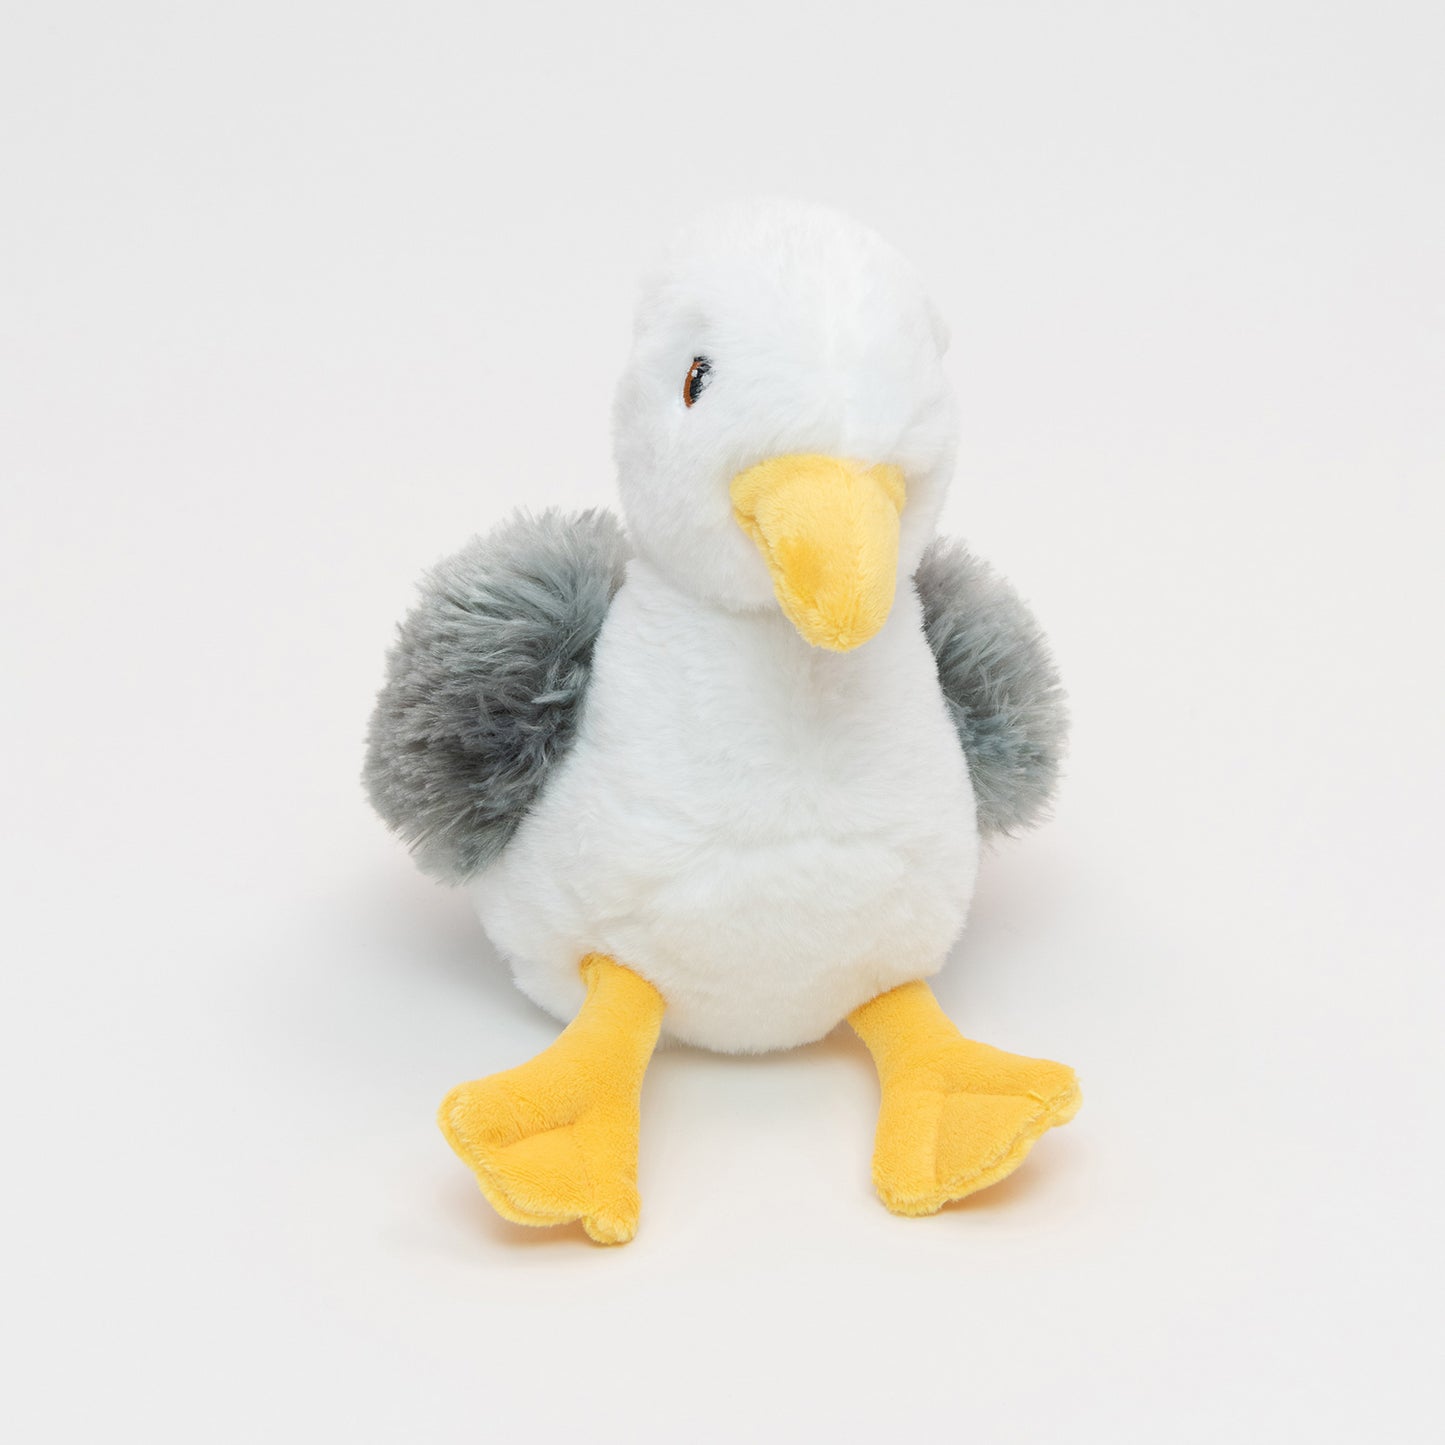 A plush seagull pictured on a white background.